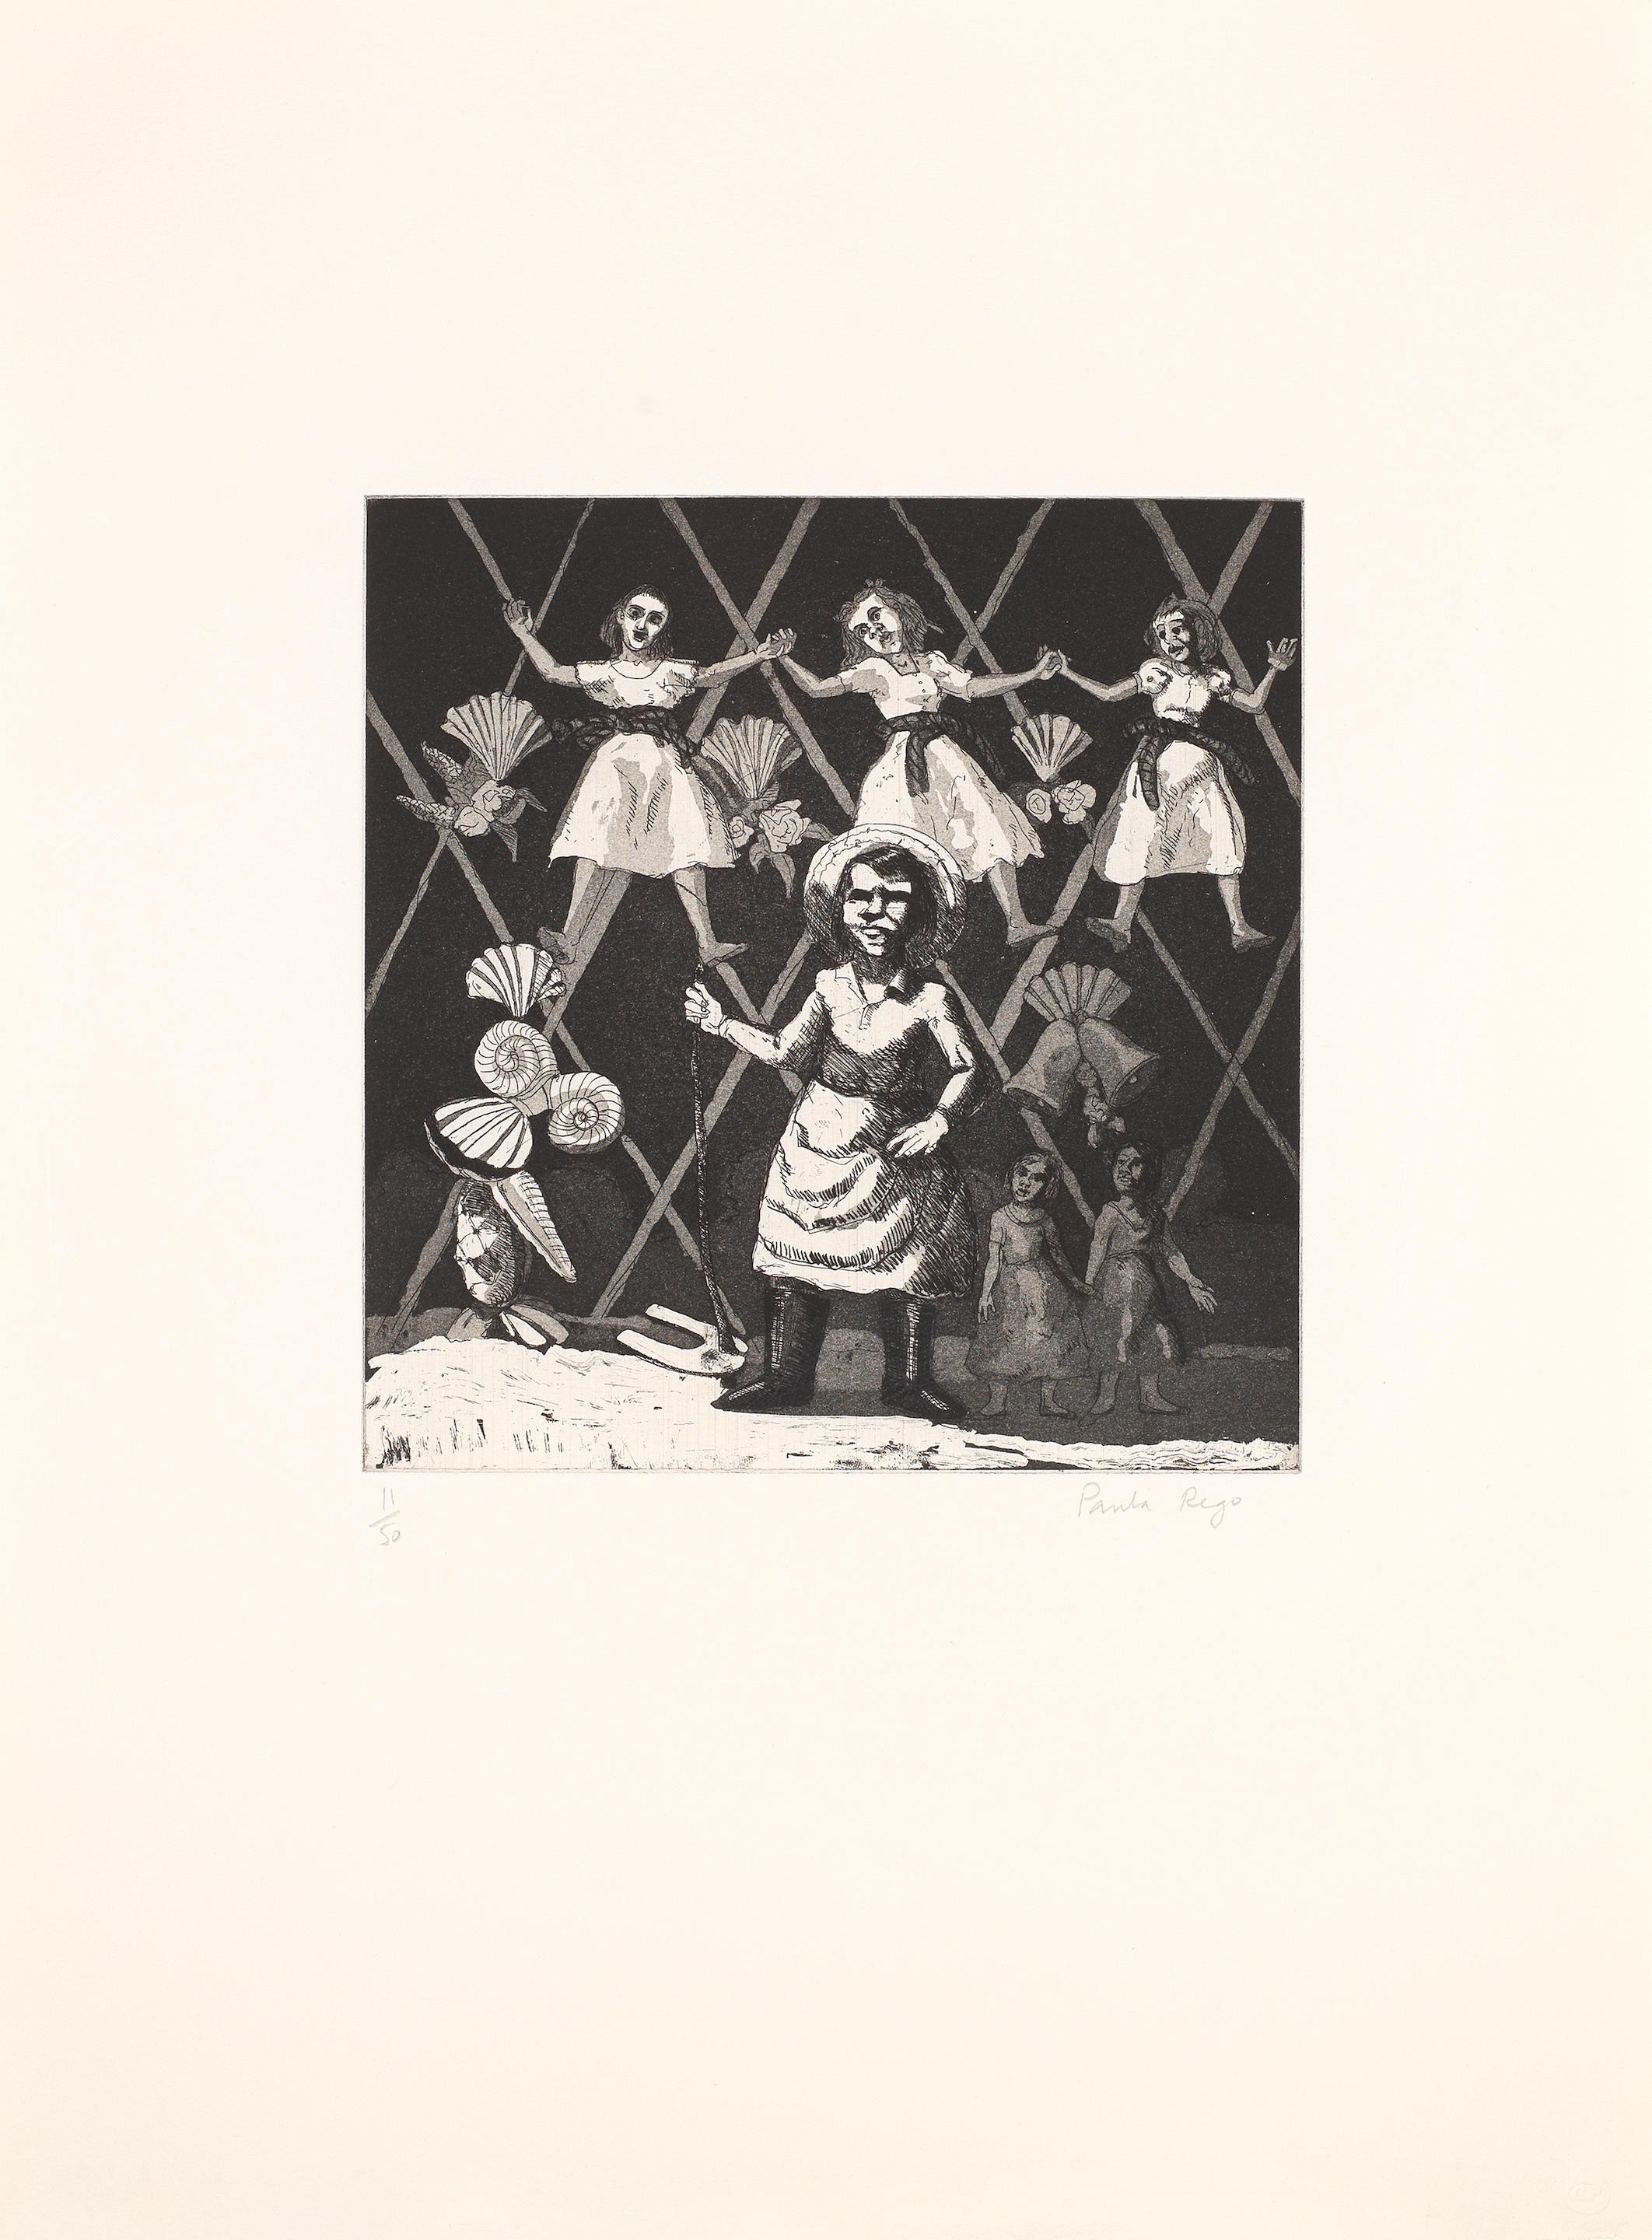 Mary, Mary Quite Contrary I -- Print, Nursery Rhymes, Etching by Paula Rego